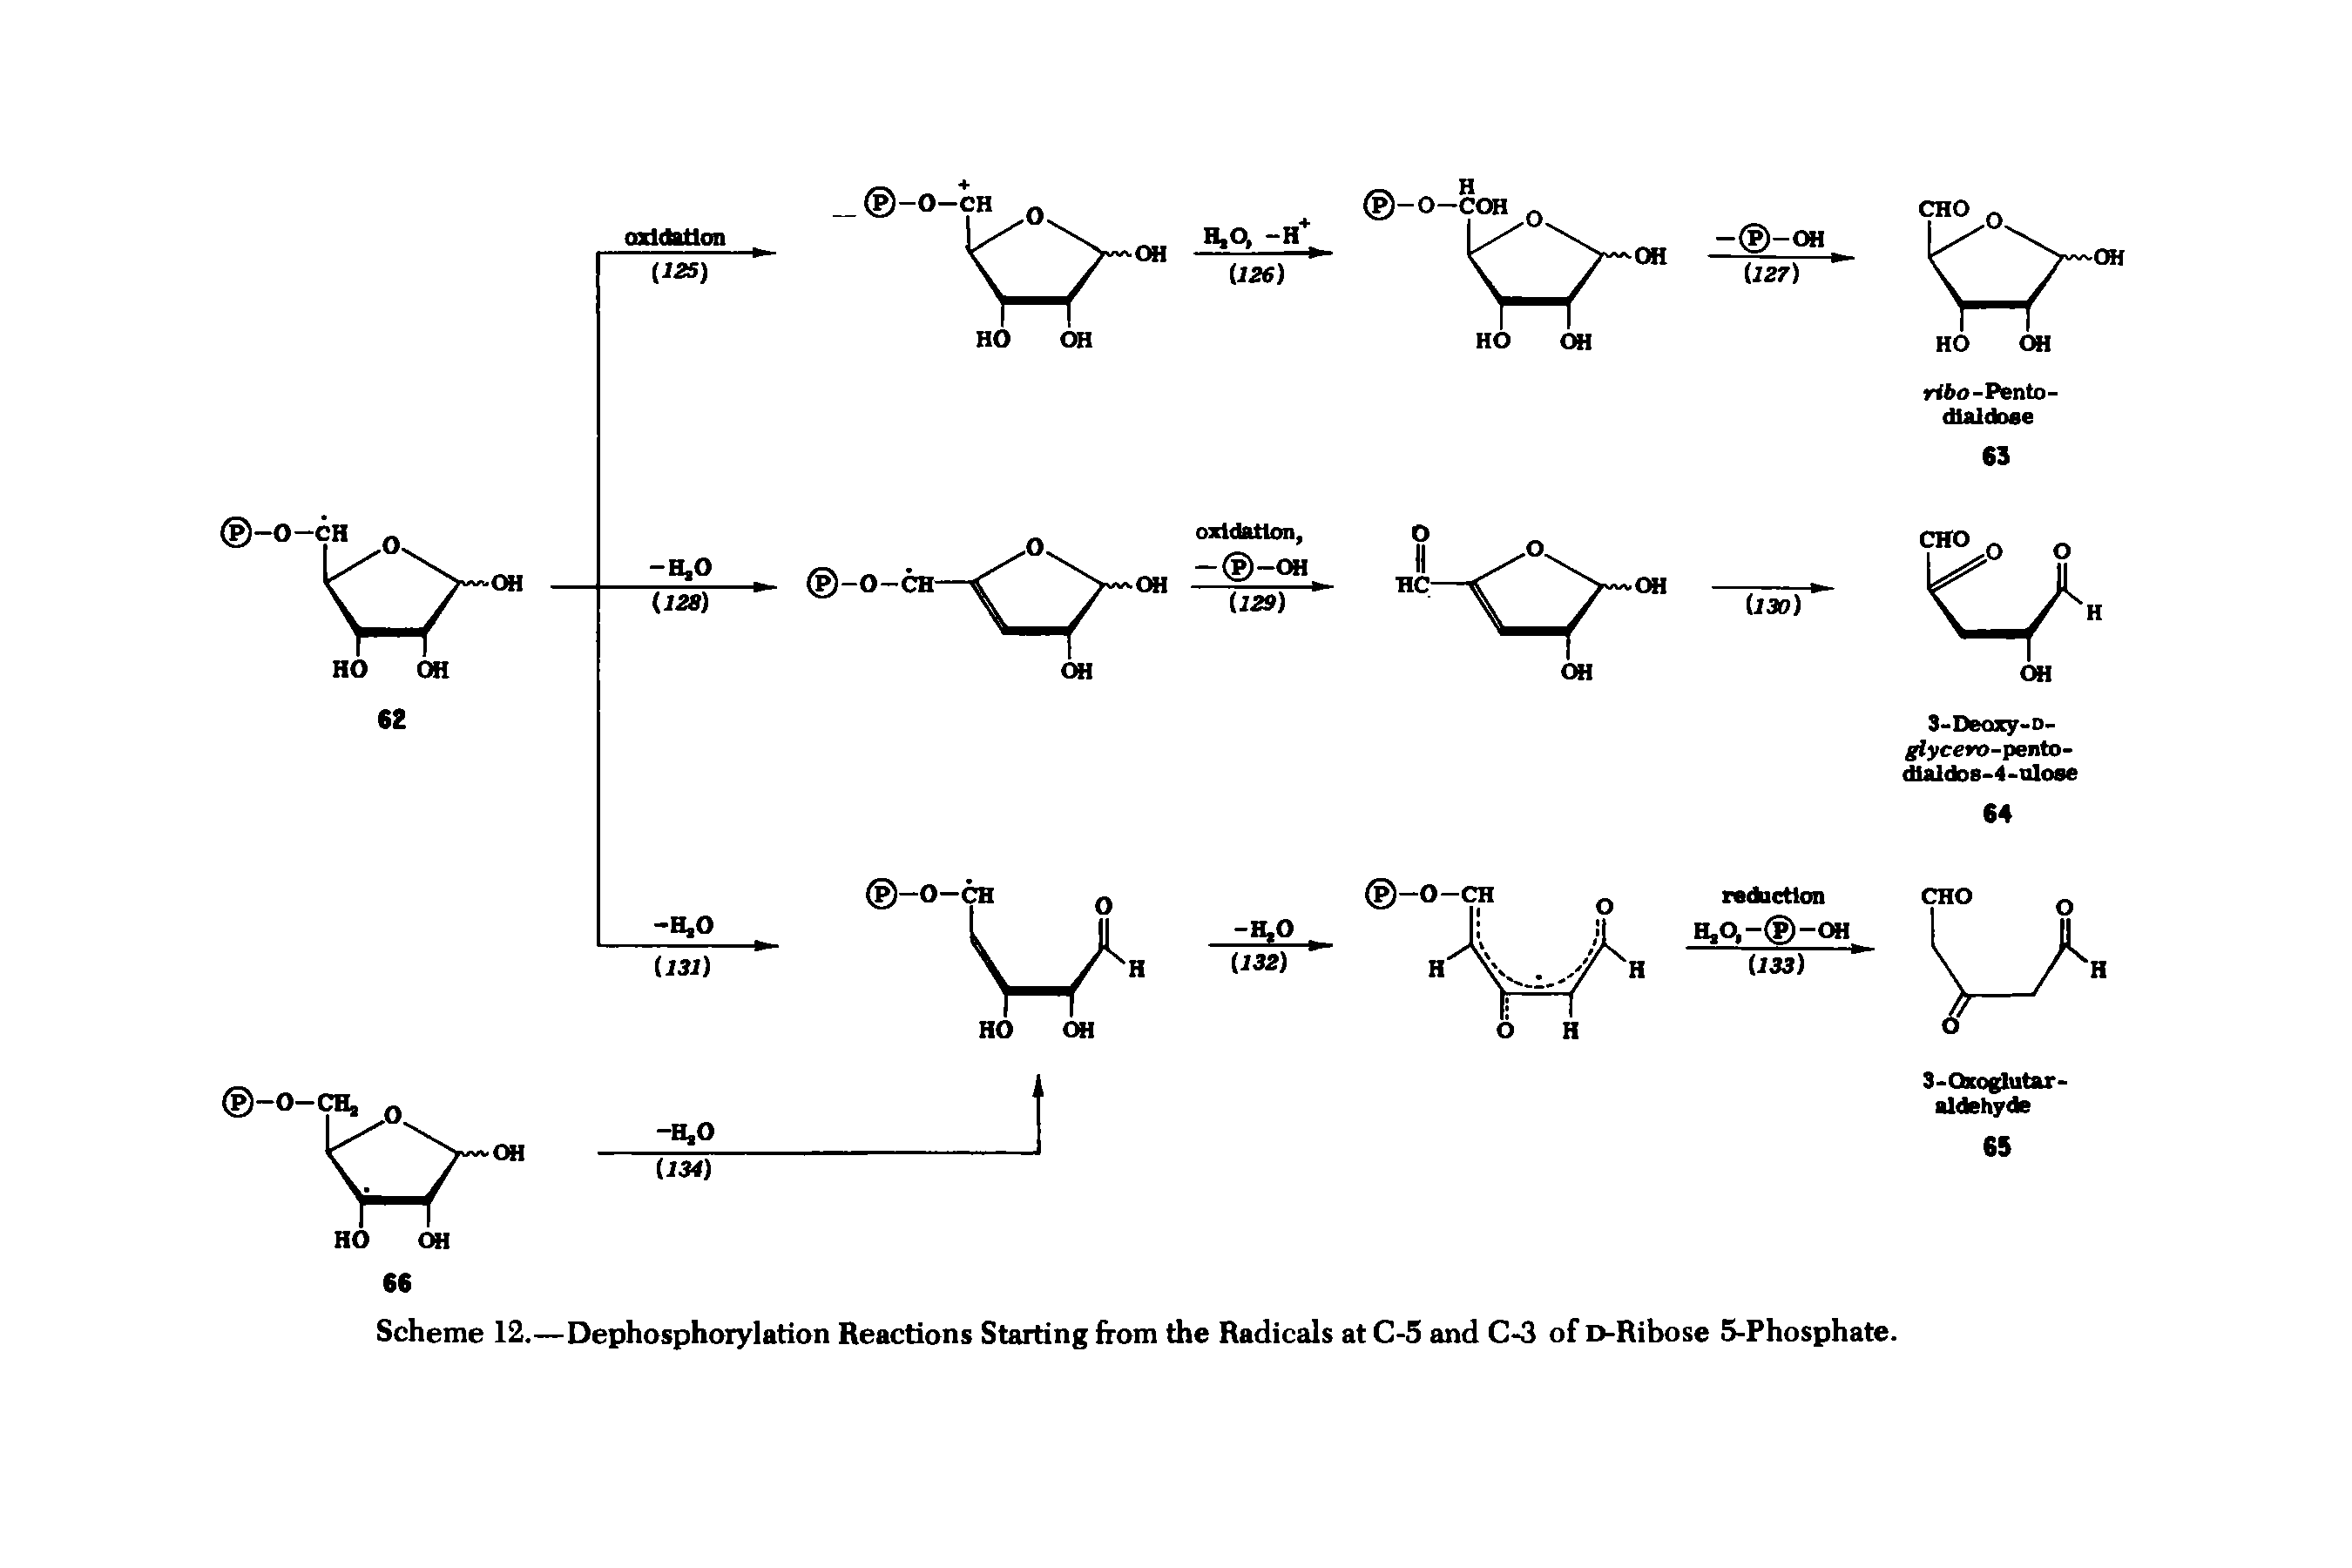 Scheme 12.—Dephosphorylation Reactions Starting from the Radicals at C-5 and C-3 of D-Ribose 5-Phosphate.